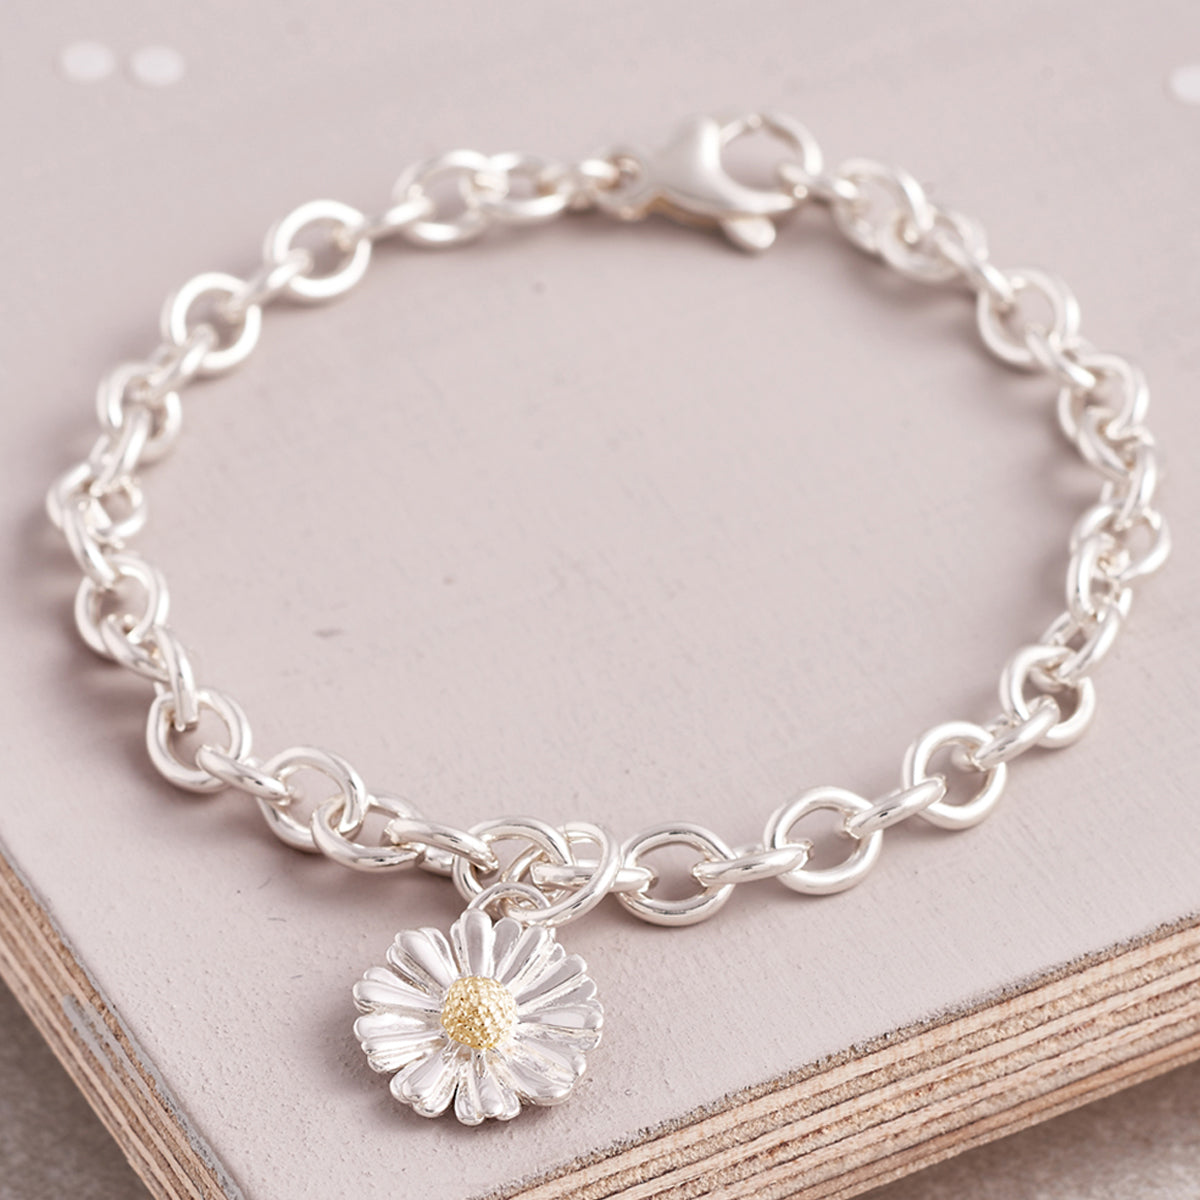 Silver and solid gold daisy charm bracelet flower jewellery UK